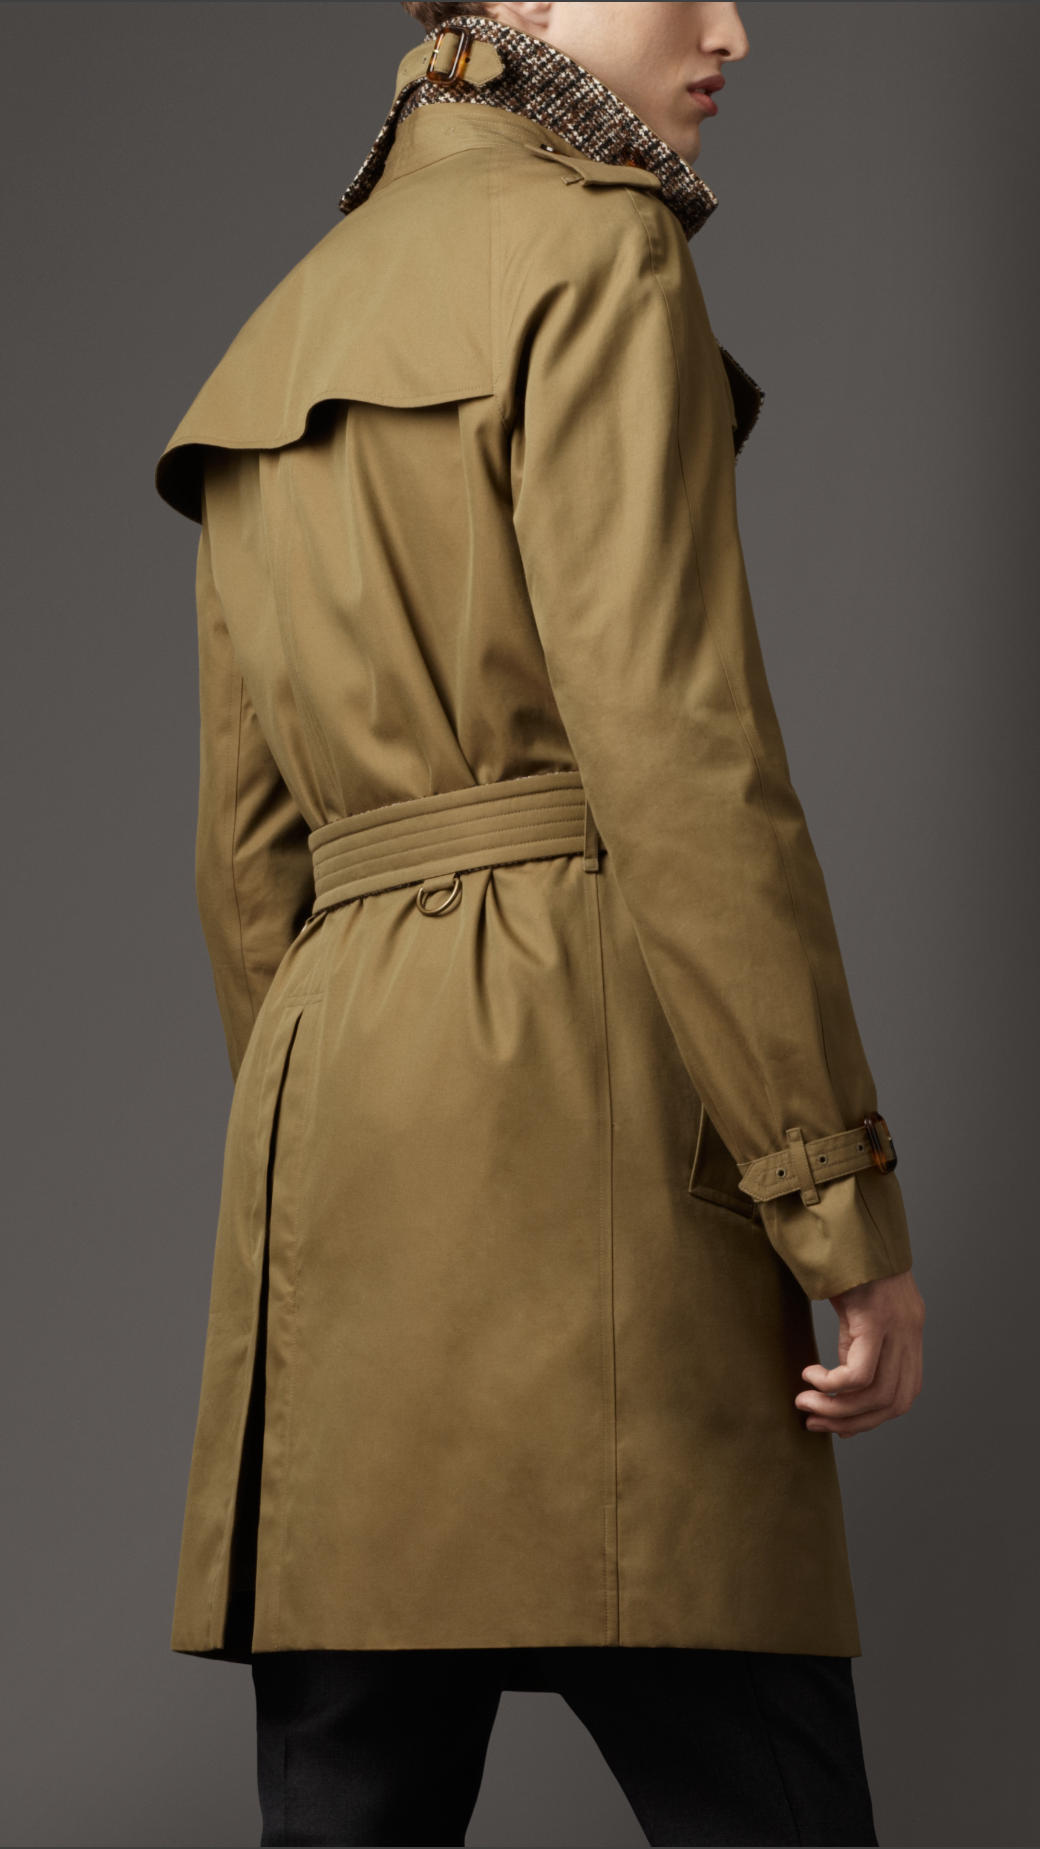 Lyst - Burberry Midlength Cotton Gabardine Wool Lined Trench Coat in ...